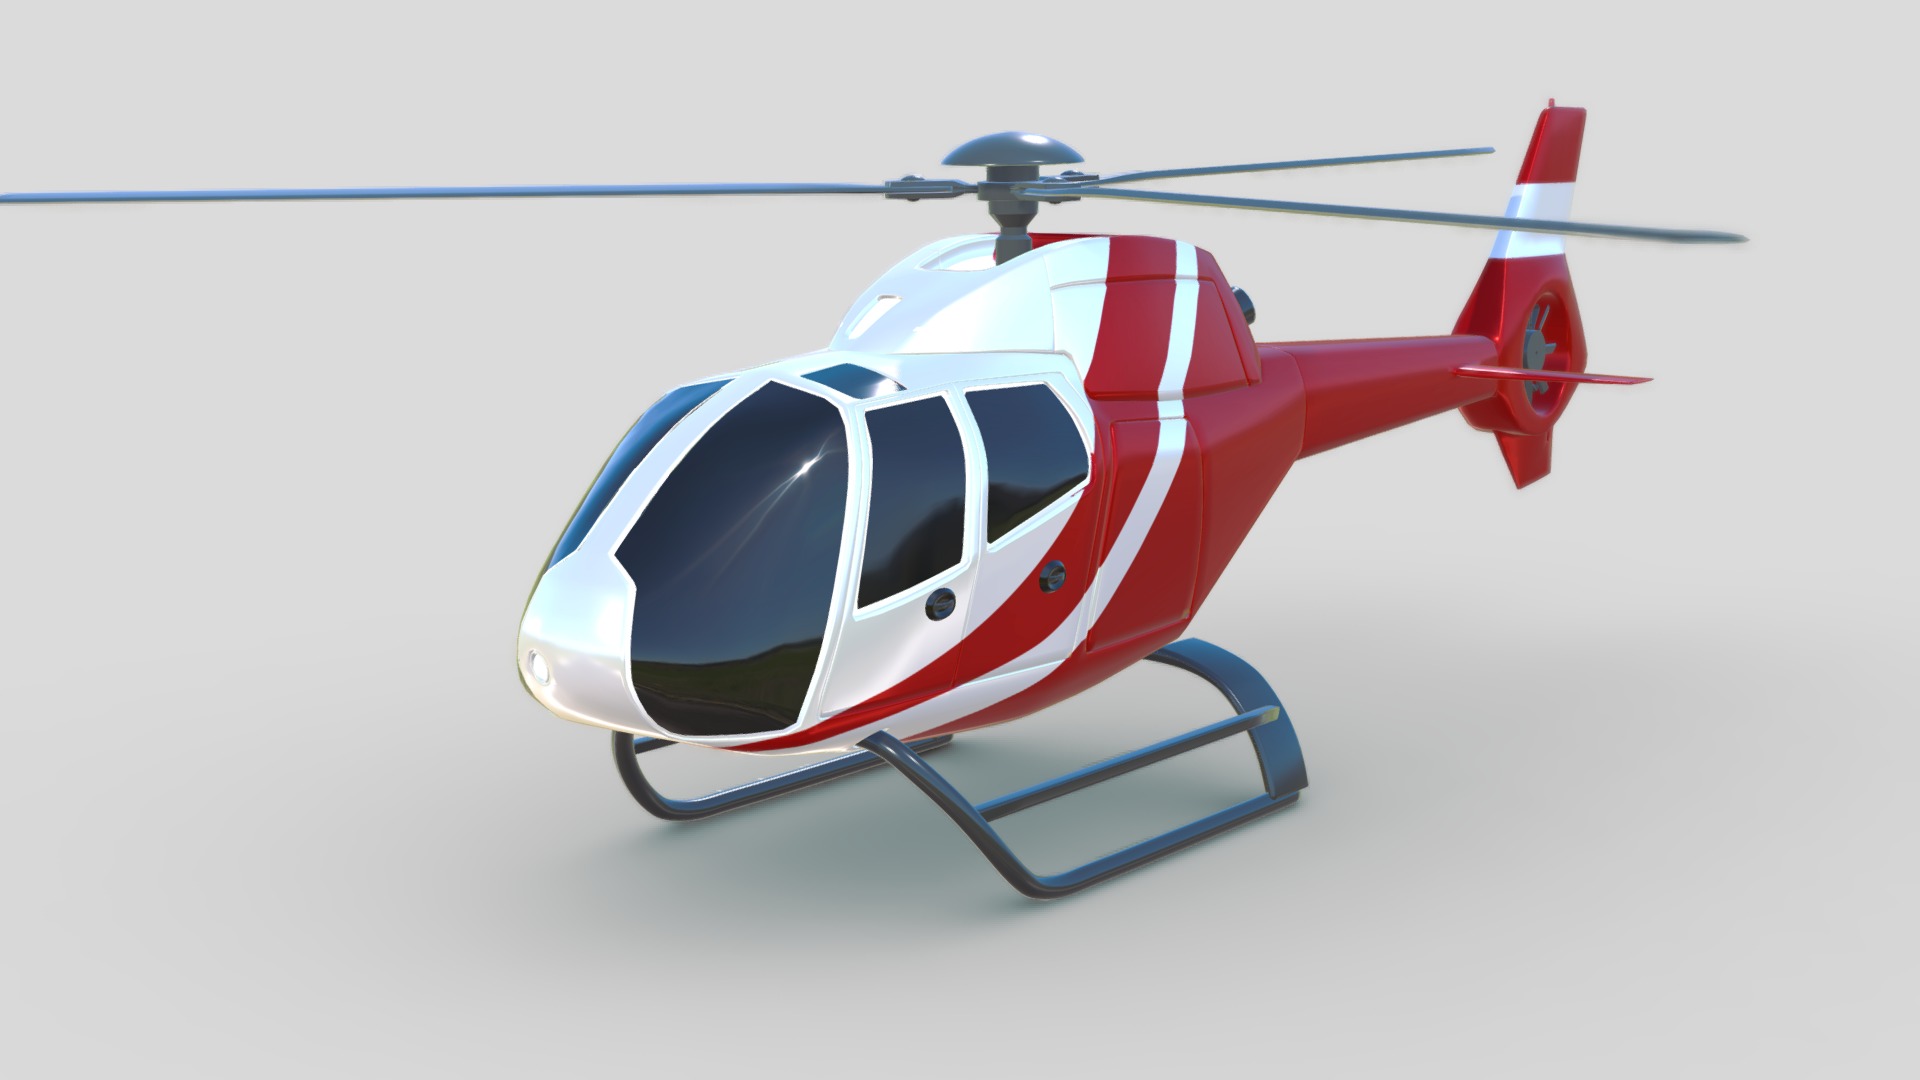 3D model Eurocopter Colibri EC-120B civil helicopter - This is a 3D model of the Eurocopter Colibri EC-120B civil helicopter. The 3D model is about a white and red helicopter.